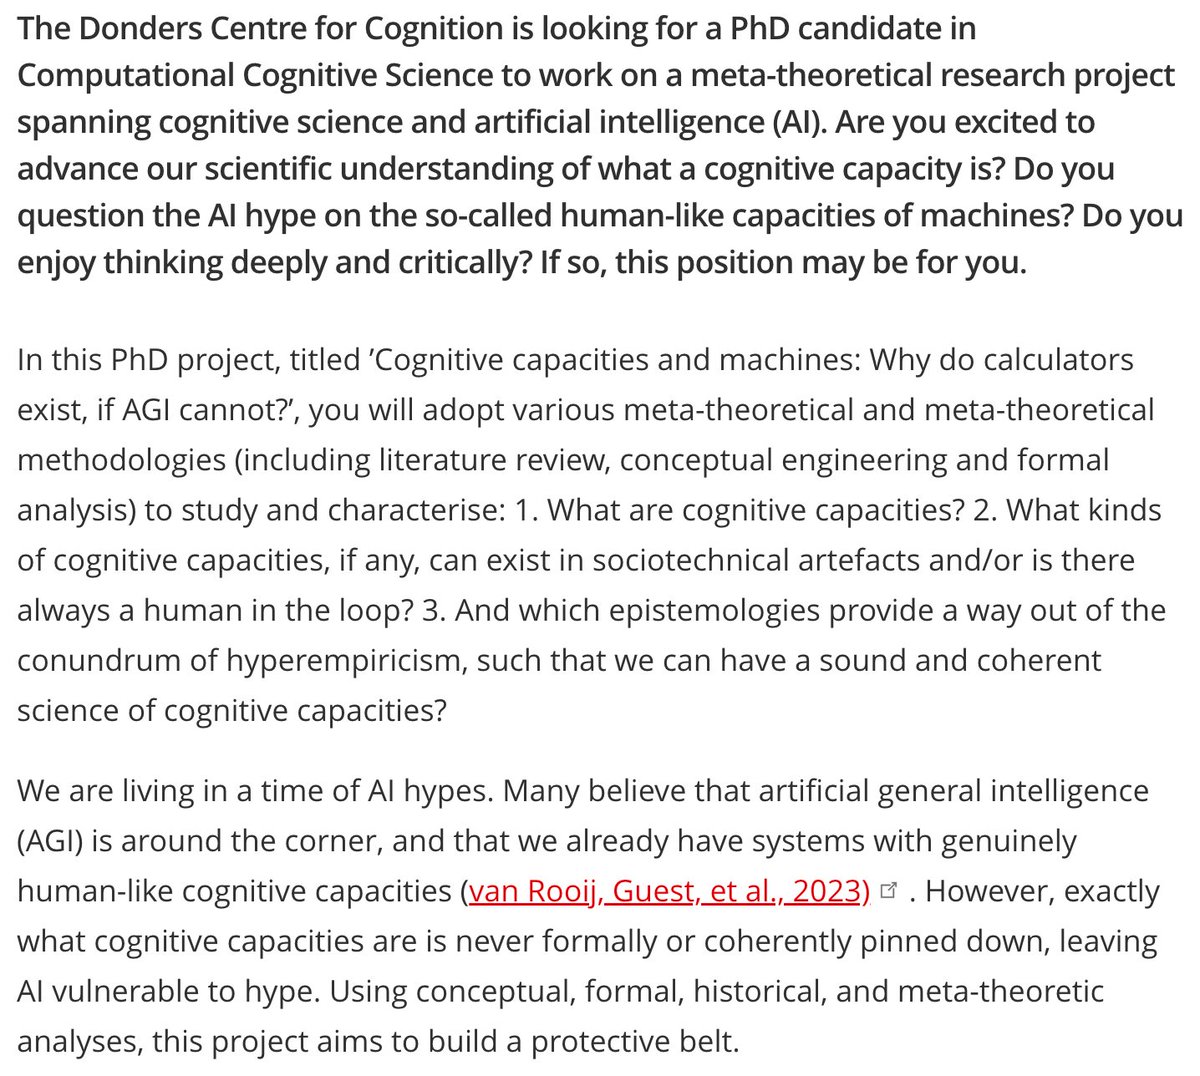 Thrilled to say we have a PhD position w/ me @MarkBlokpoel & @IrisVanRooij @DondersInst: in Computational Cognitive Science titled: Cognitive capacities & machines: Why do calculators exist, if AGI cannot? Salary: €2770-€3539 Deadline: 22-05-2024 Please RT & consider applying!